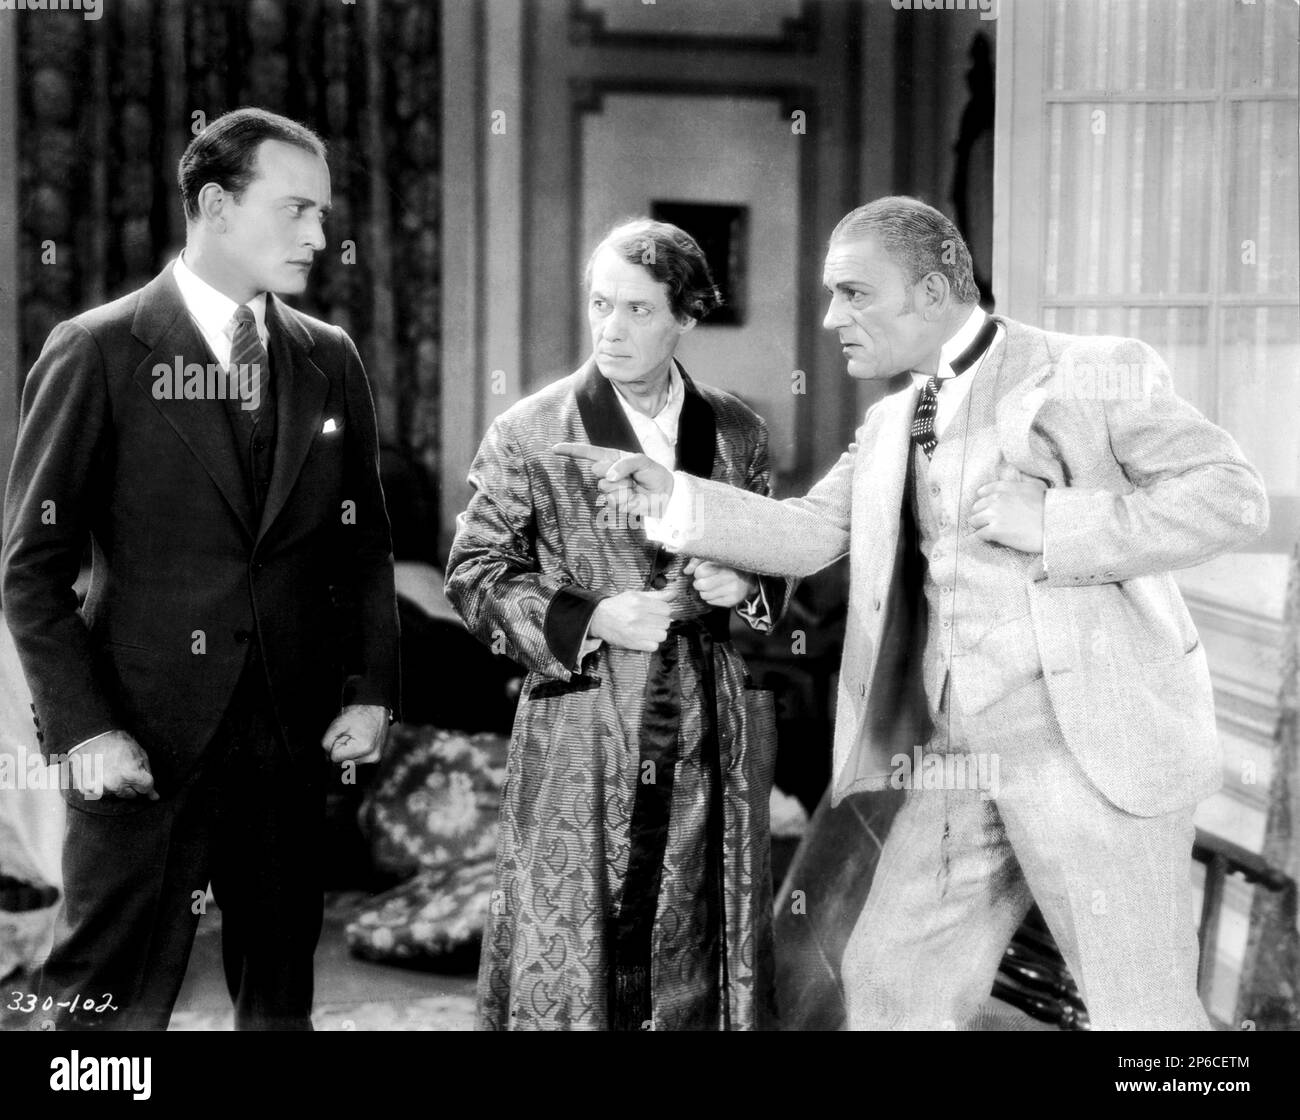 1927 , USA : The movie actor LON CHANEY  Senior  ( 1883 - 1930 ) with CONRAD NAGEL ( 1897 – 1970 ) and  Henry B. Walthall ( 1878 – 1936 ) in LONDON AFTER MIDNIGHT  ( Il fantasma del castello ) by TOD BROWNING , from the story ' The Hypnotist ' by Tod Browning . - CINEMA MUTO - SILENT MOVIE  - triller  - horror  - tie - cravatta ----  Archivio GBB Stock Photo